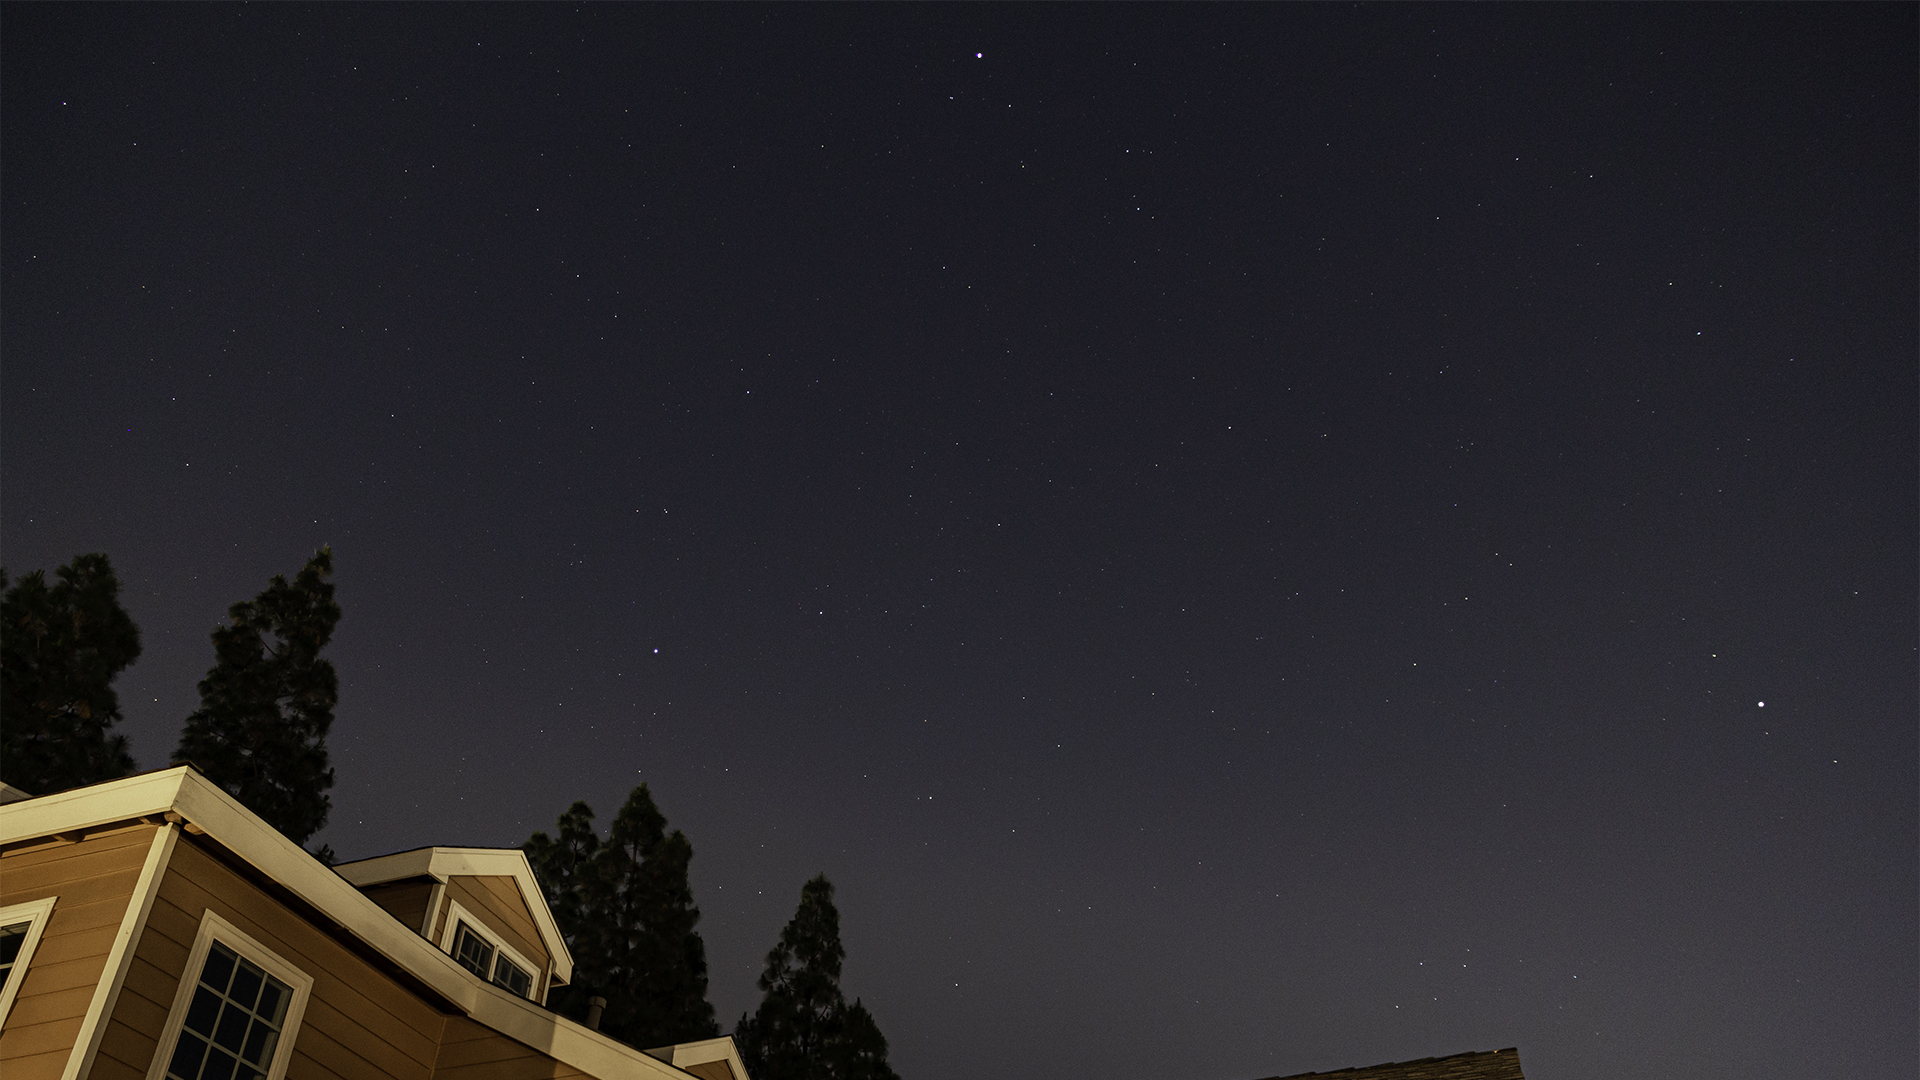 Night sky photo of the Summer Triangle with stars labeled.